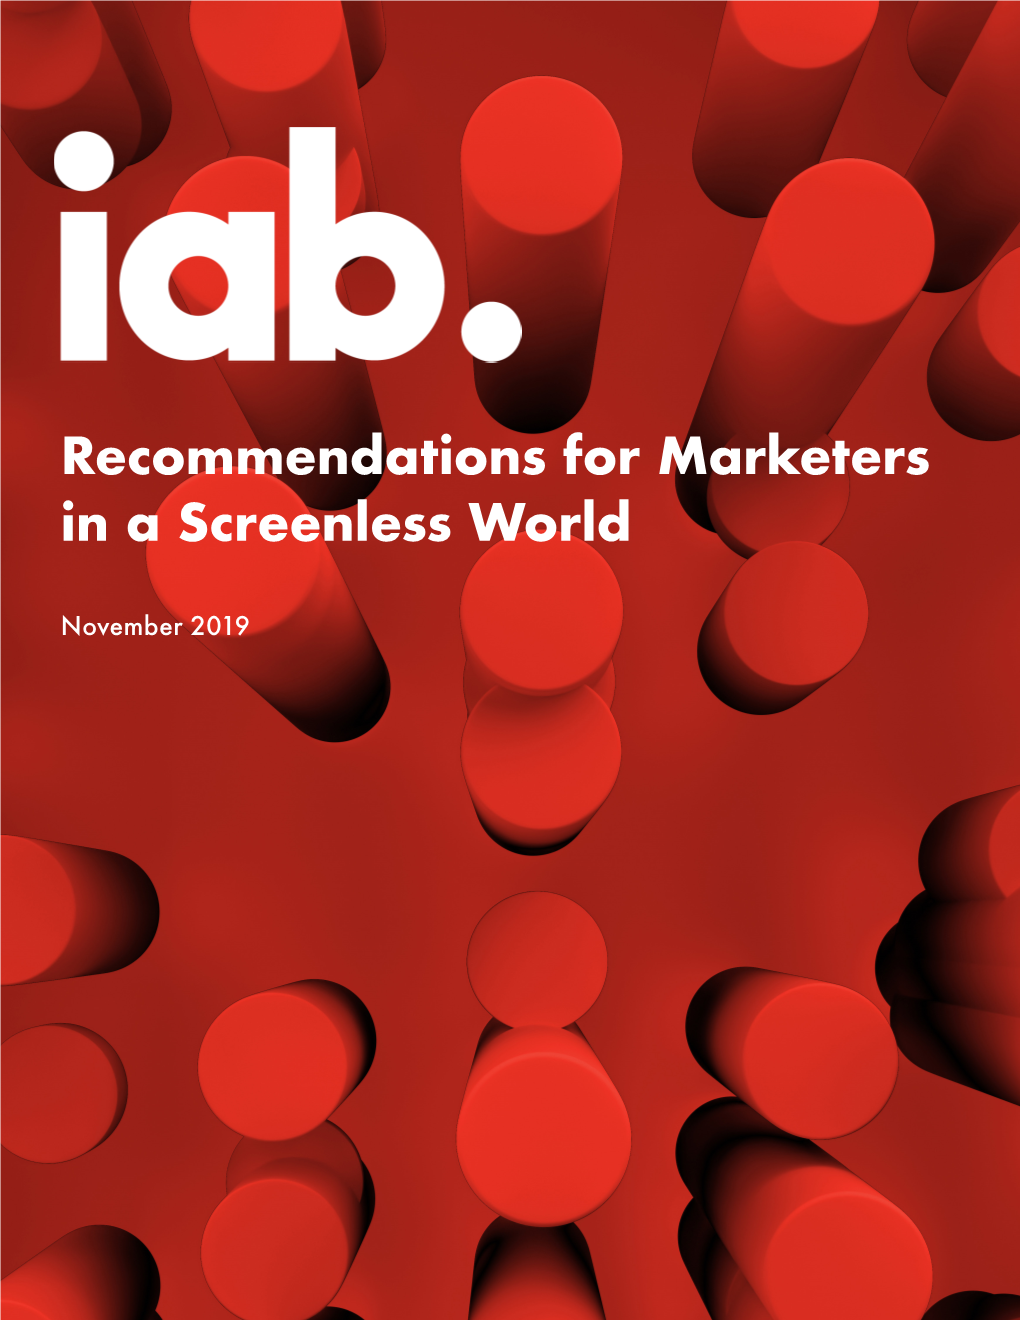 Recommendations for Marketers in a Screenless World